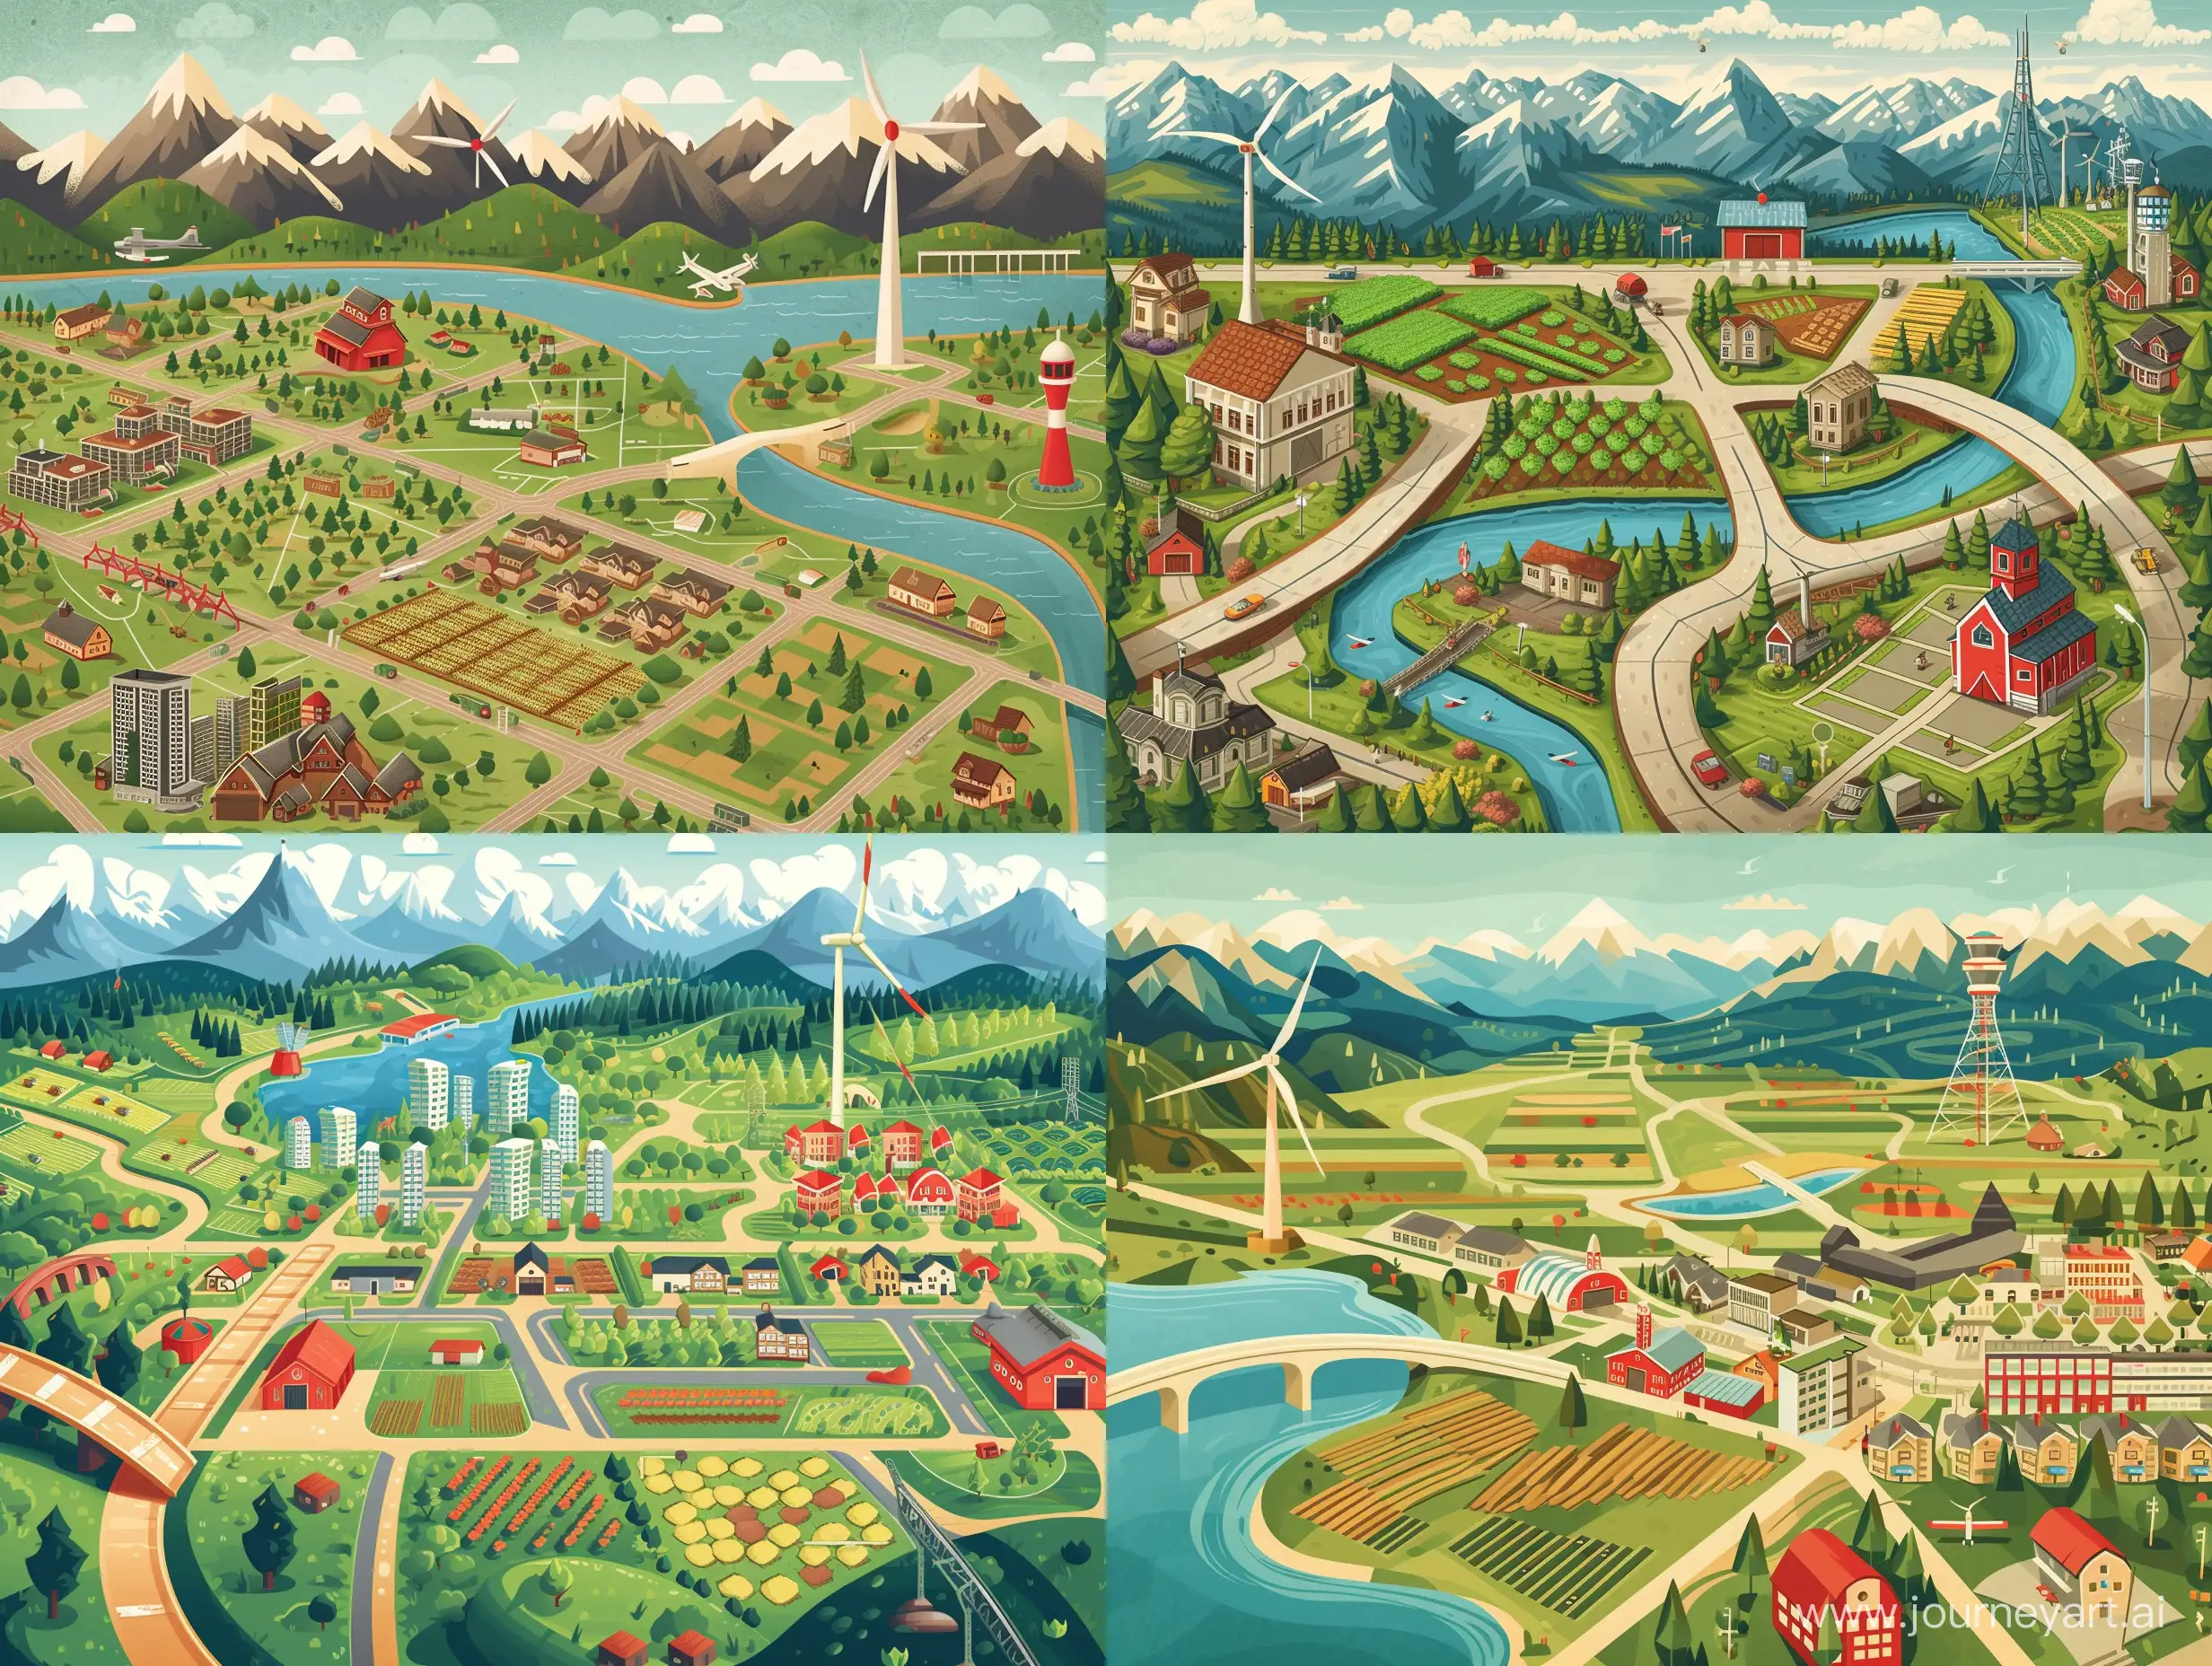  make a vintage style top view board game with a city, neighborhood, lake, mountains, bridge, farm with a field of crops, a wind turbine and red barn. On the board game add an airport with an air traffic control tower.